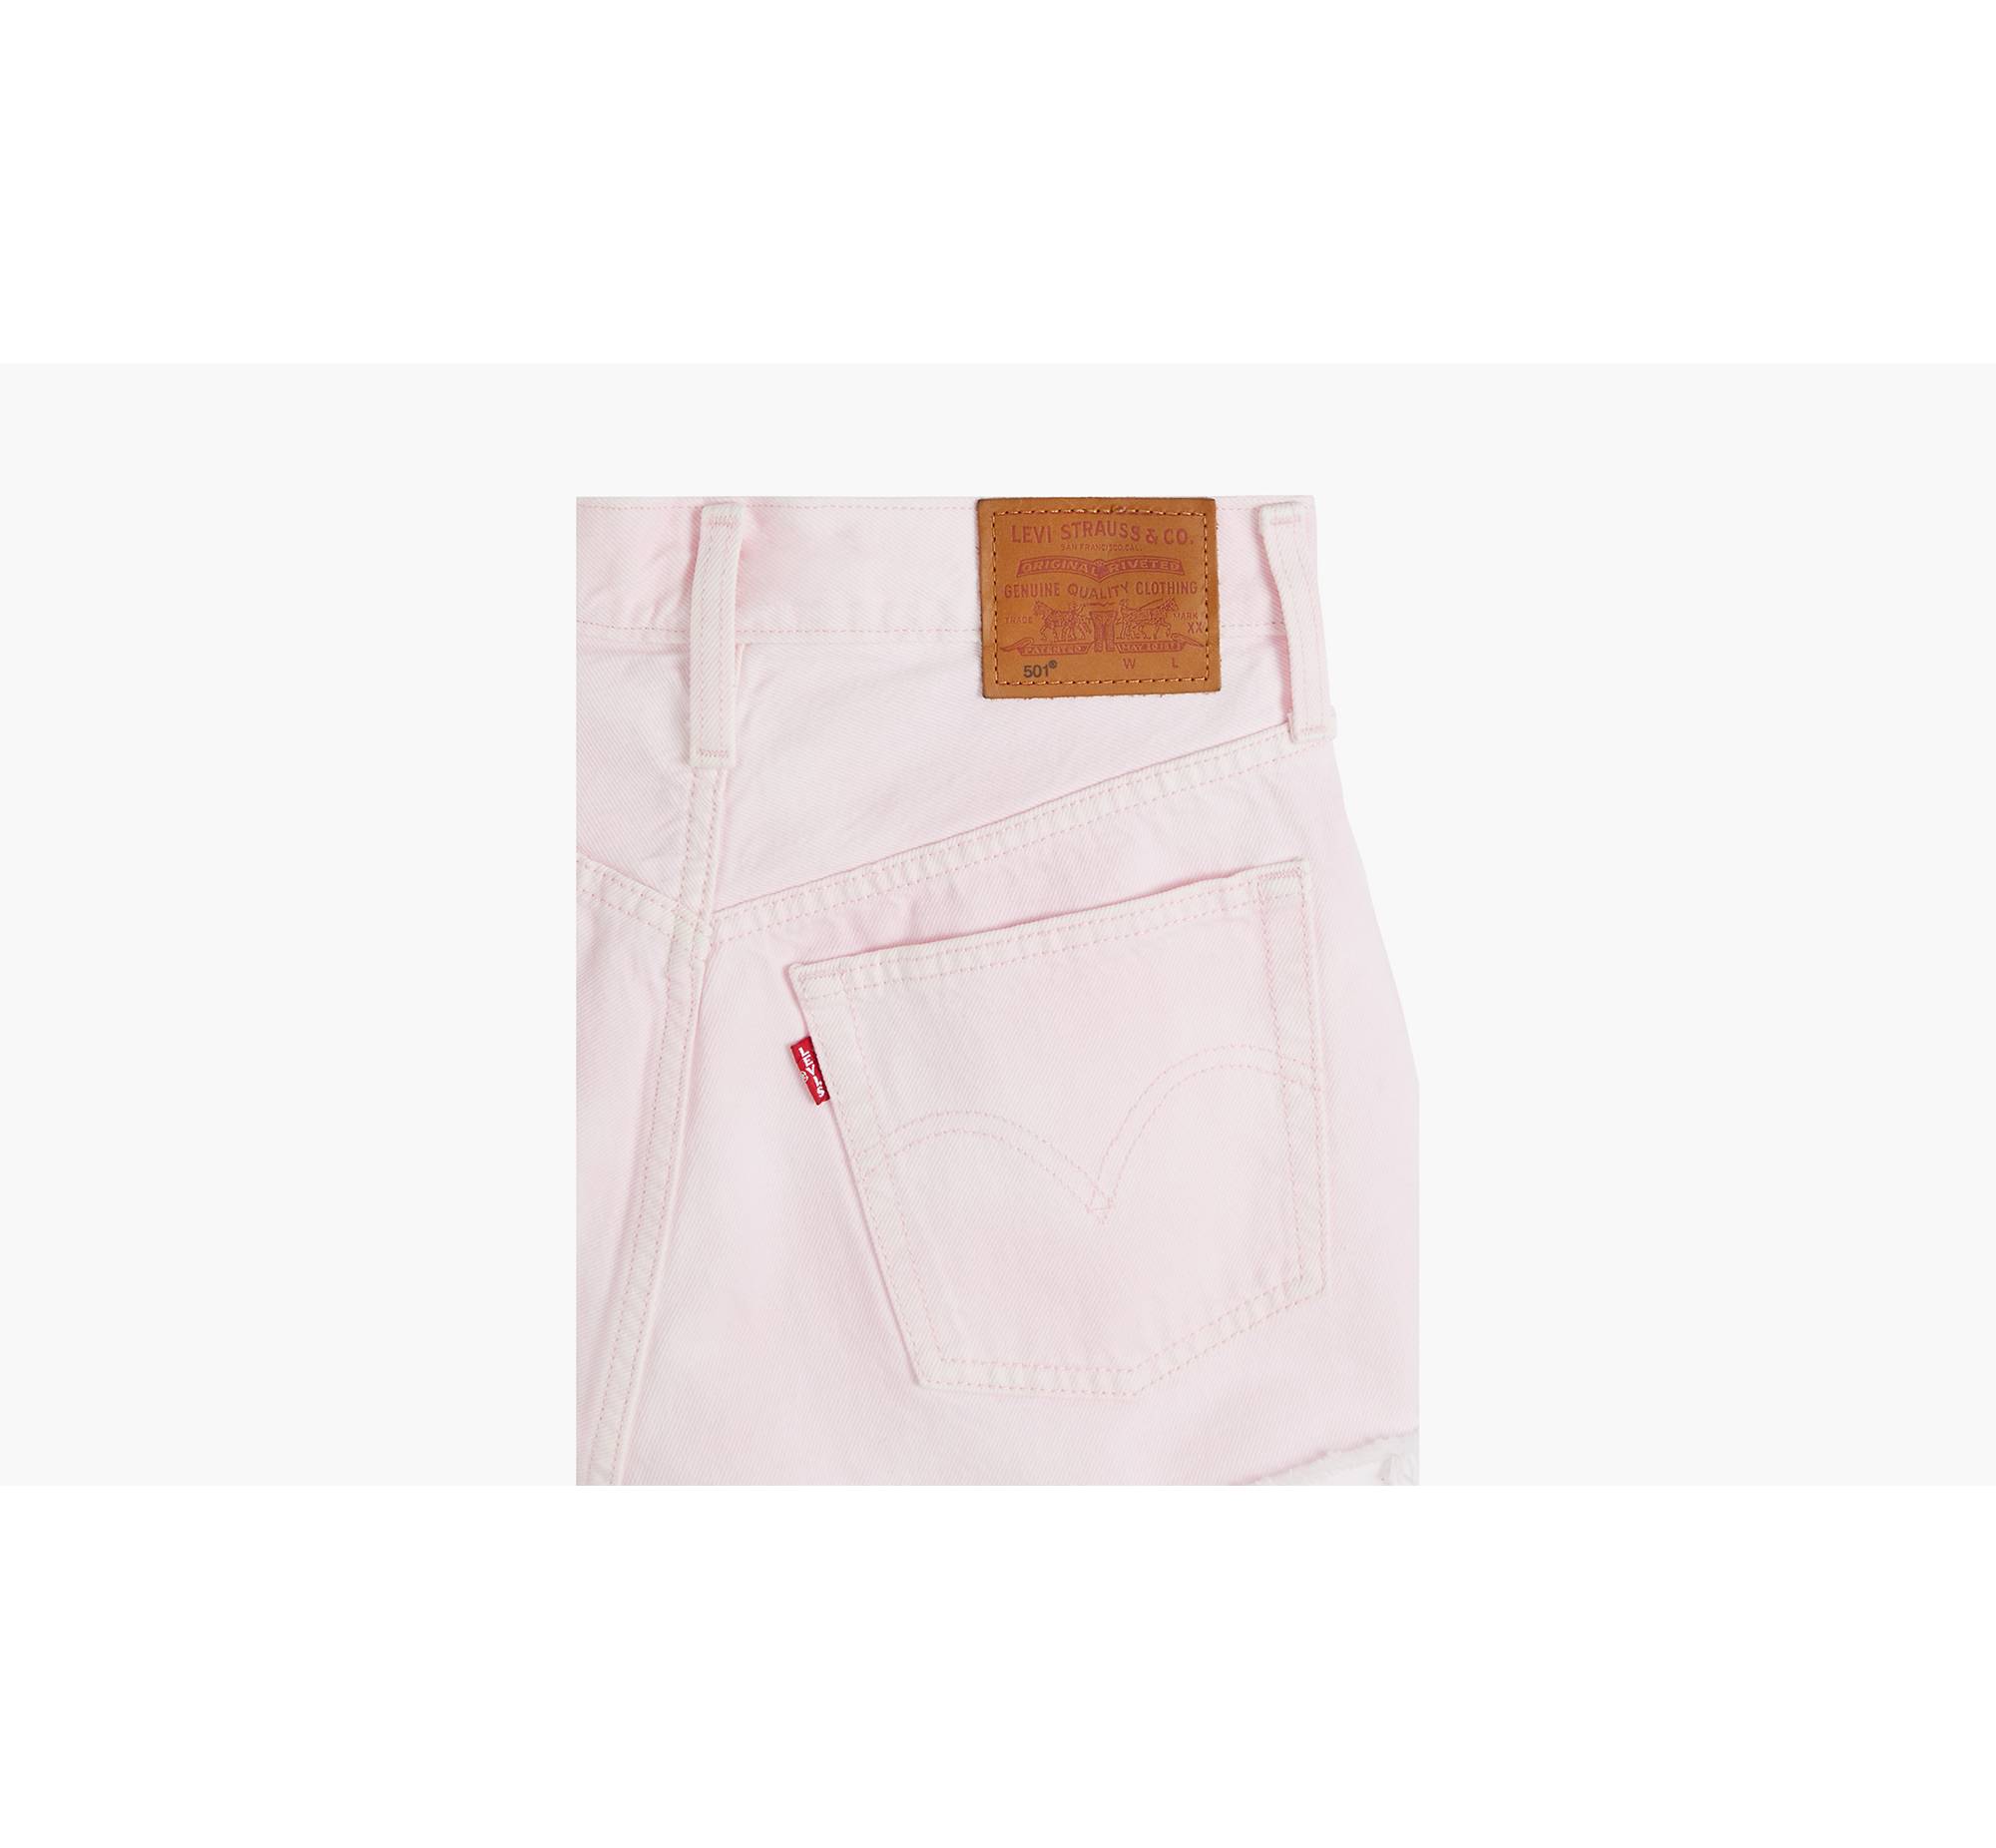 WASHED OUT PINK DENIM SHORTS | Raxtin Clothing co.